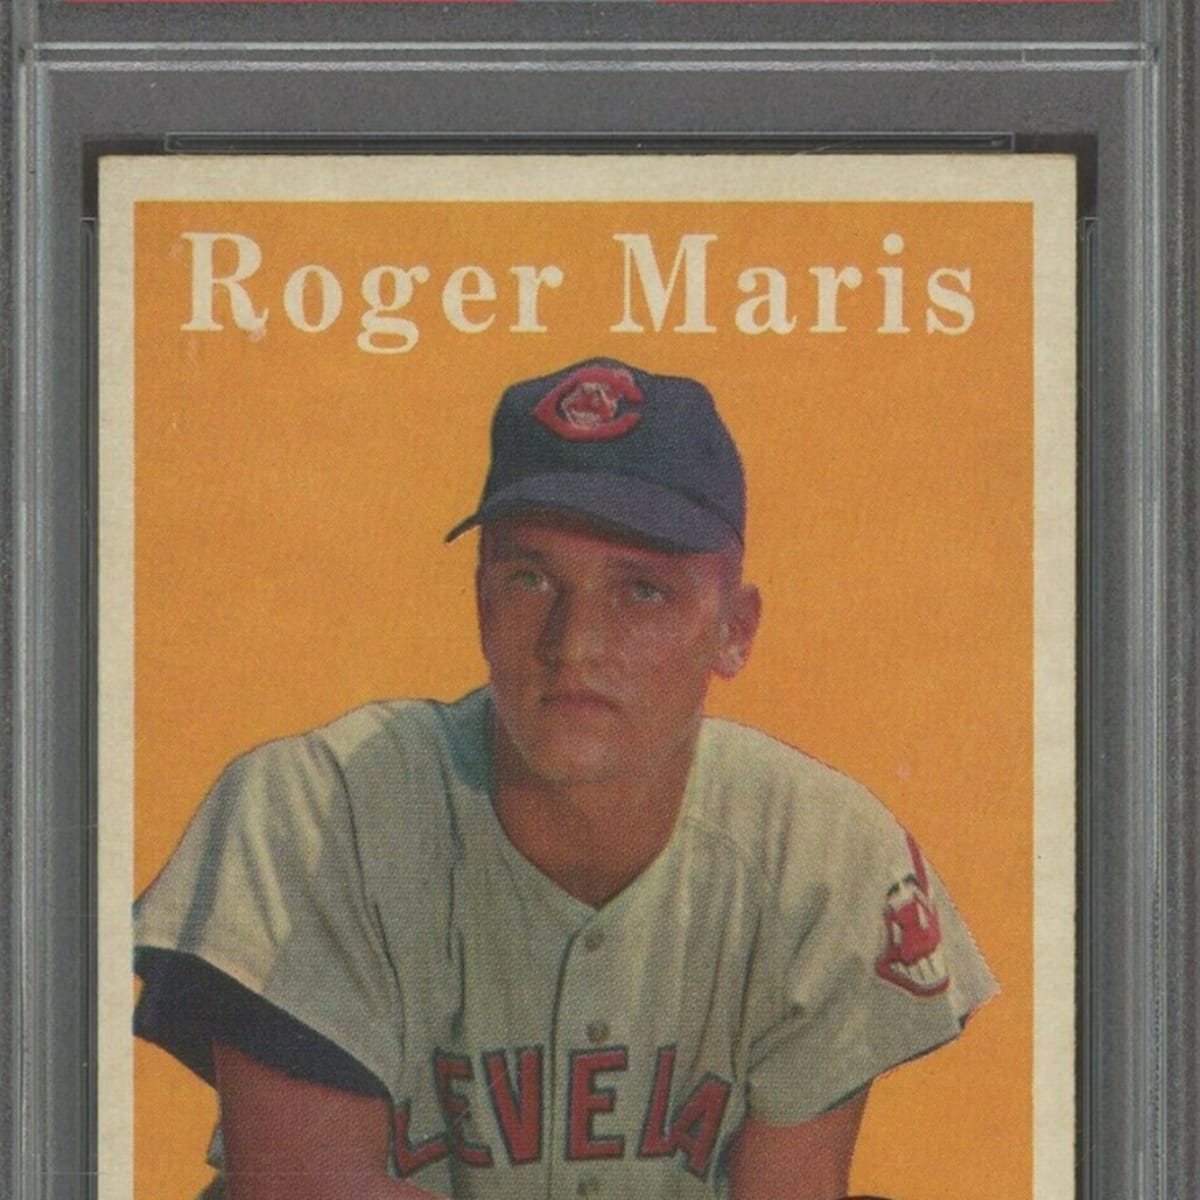 Roger Maris cards, World Series tickets and NFL kickers good options for  bargain hunters - Sports Collectors Digest